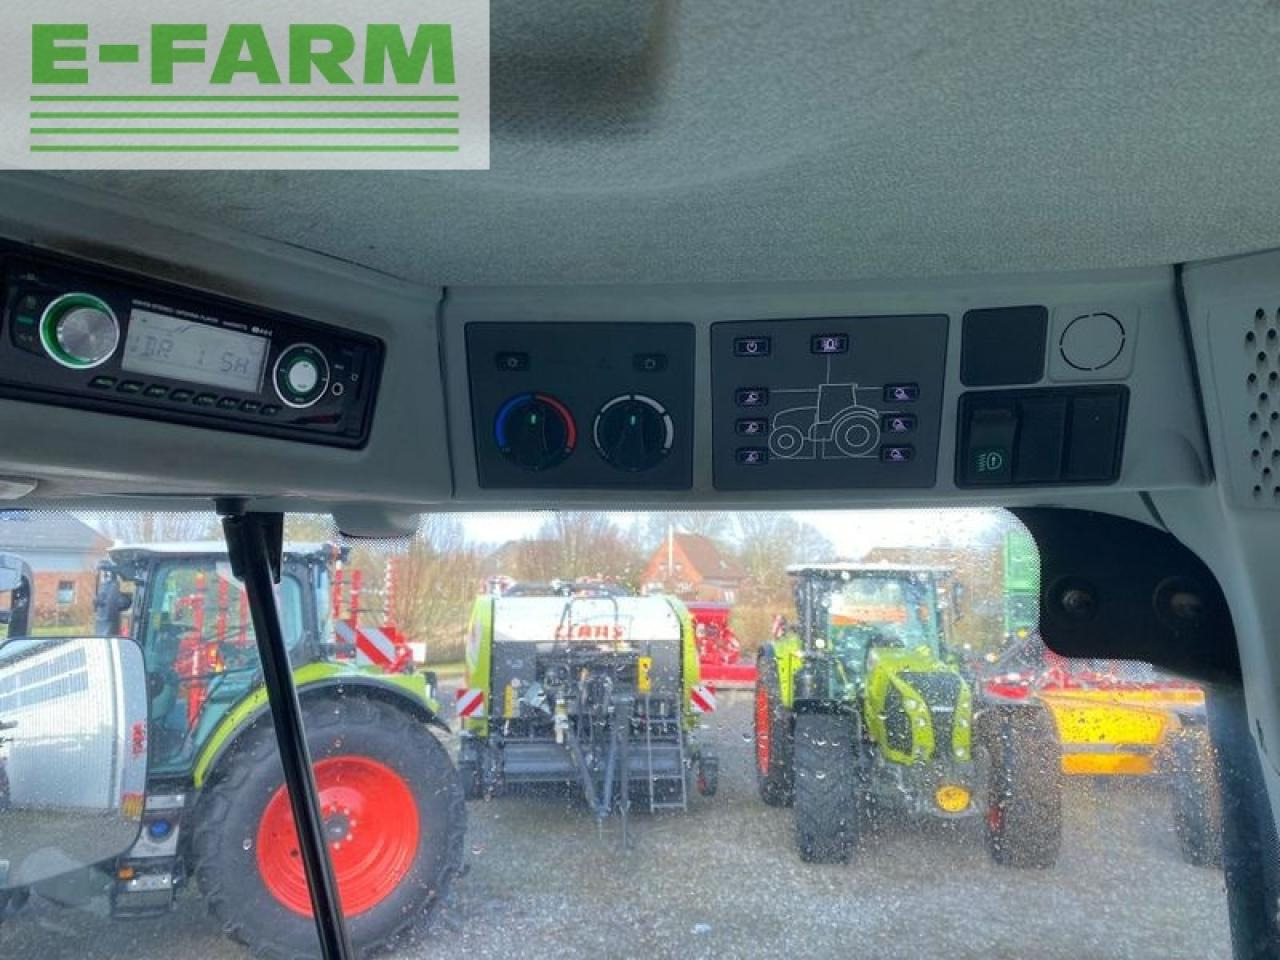 Tractor CLAAS arion 620 cmatic